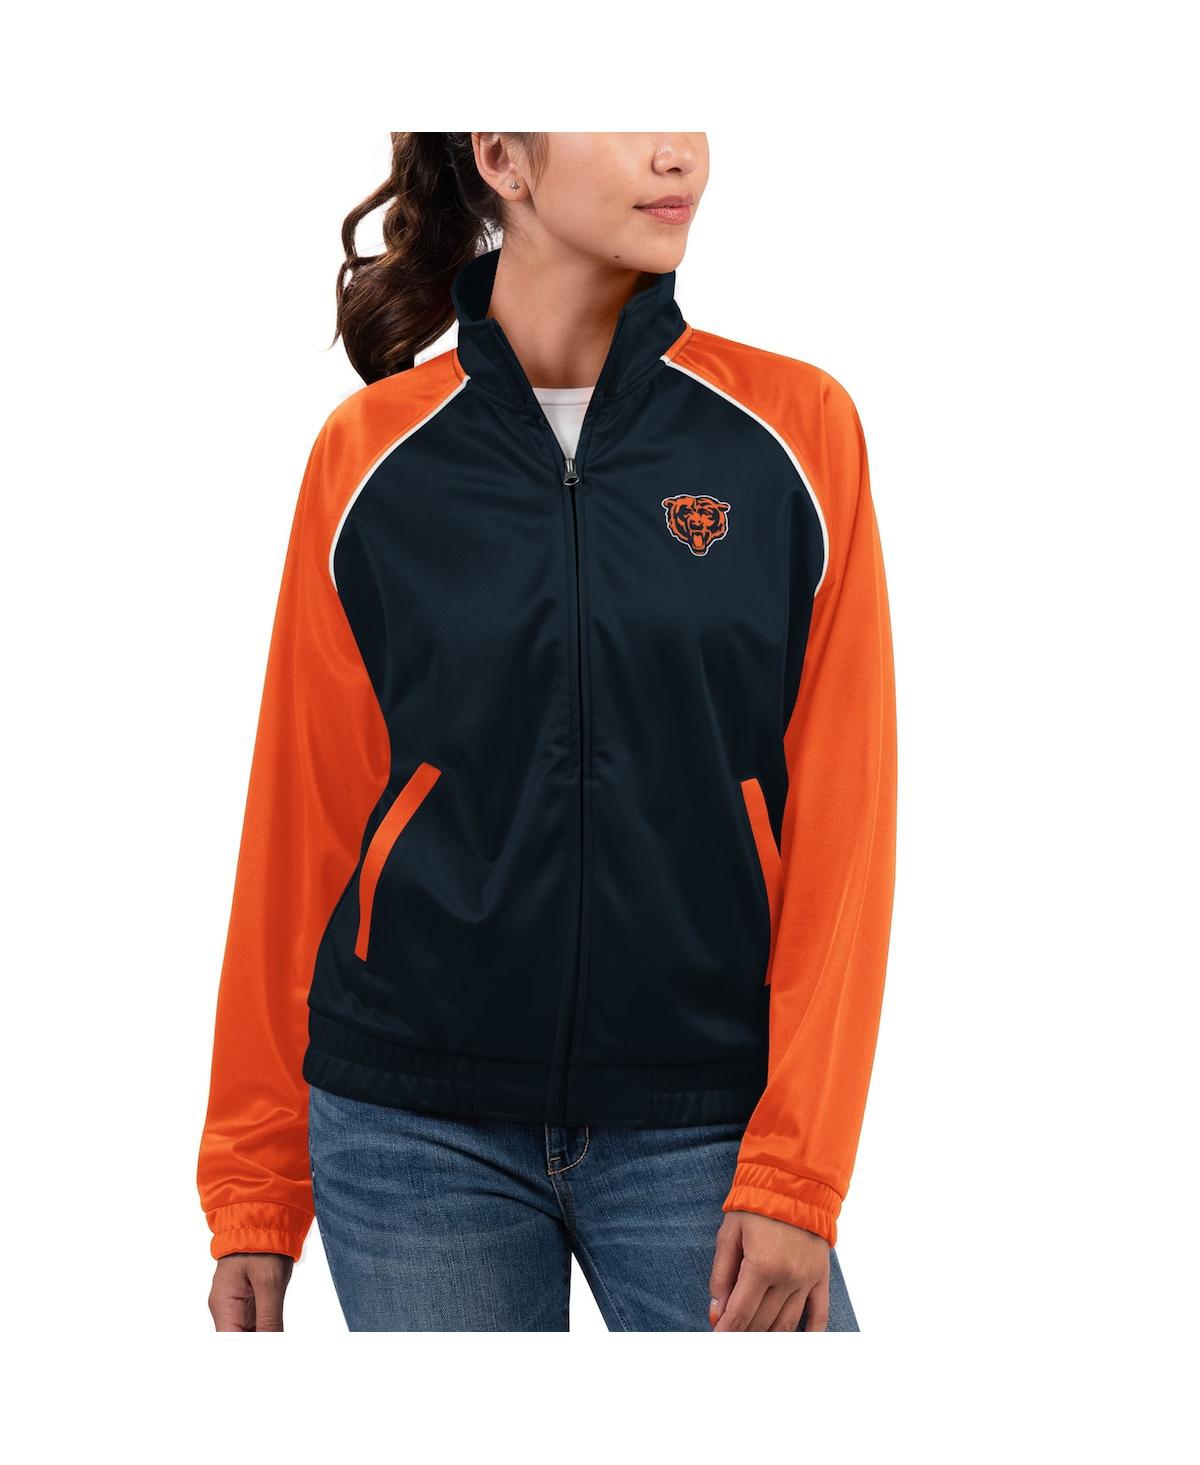 Women's G-iii 4Her by Carl Banks Navy Chicago Bears Showup Fashion Dolman Full-Zip Track Jacket - Navy